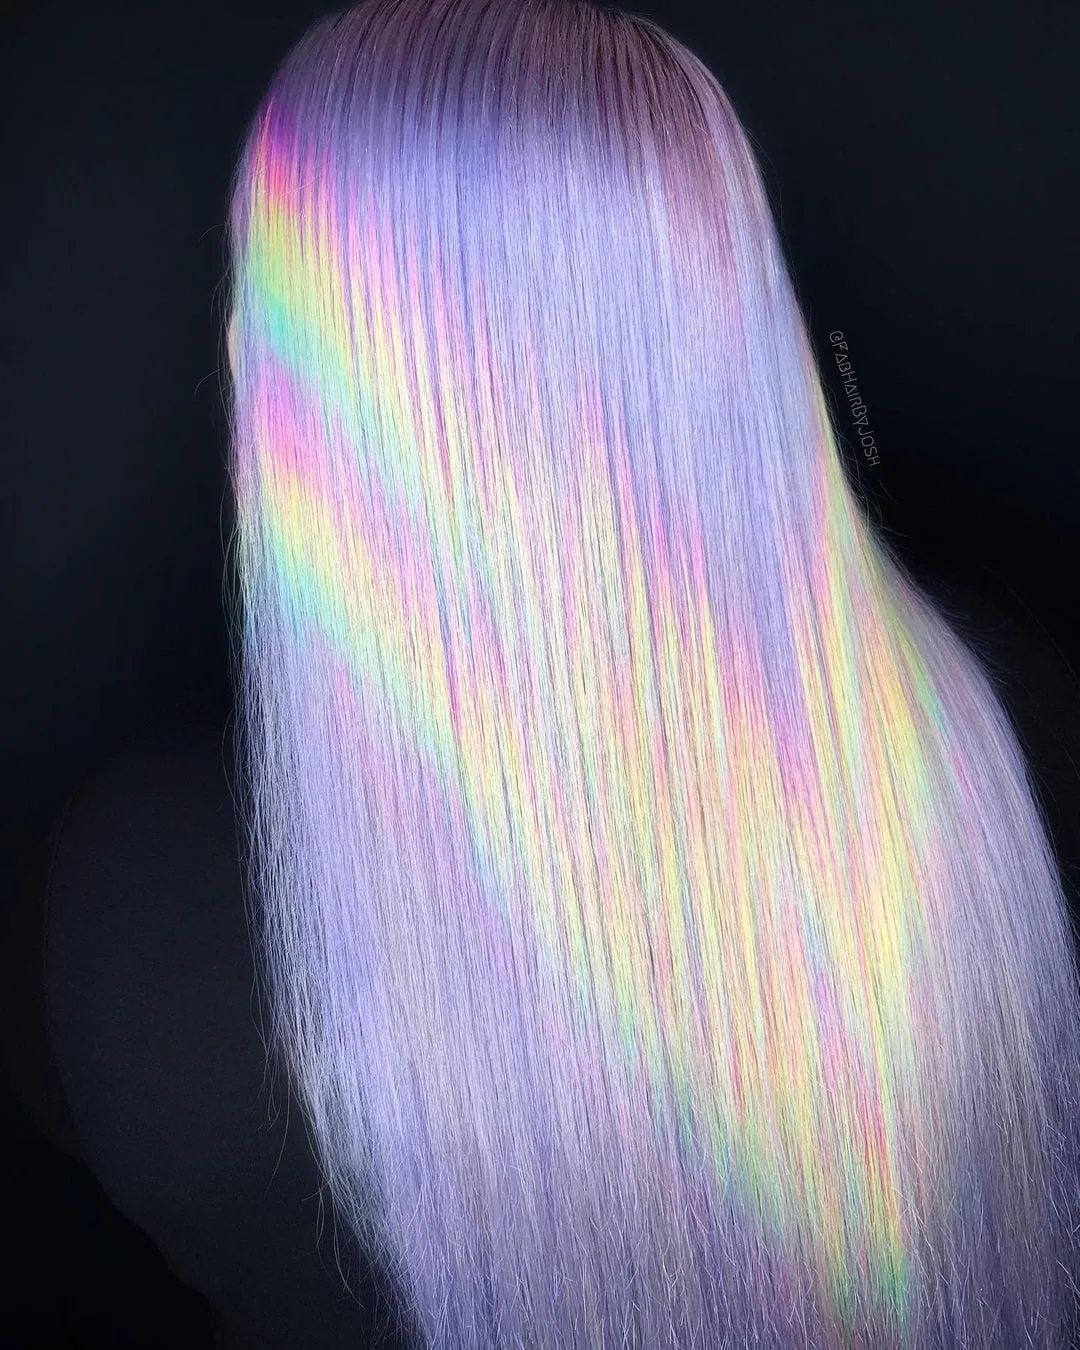 Lavender holographic hair with mainly purple coloring with lines of yellow and orange